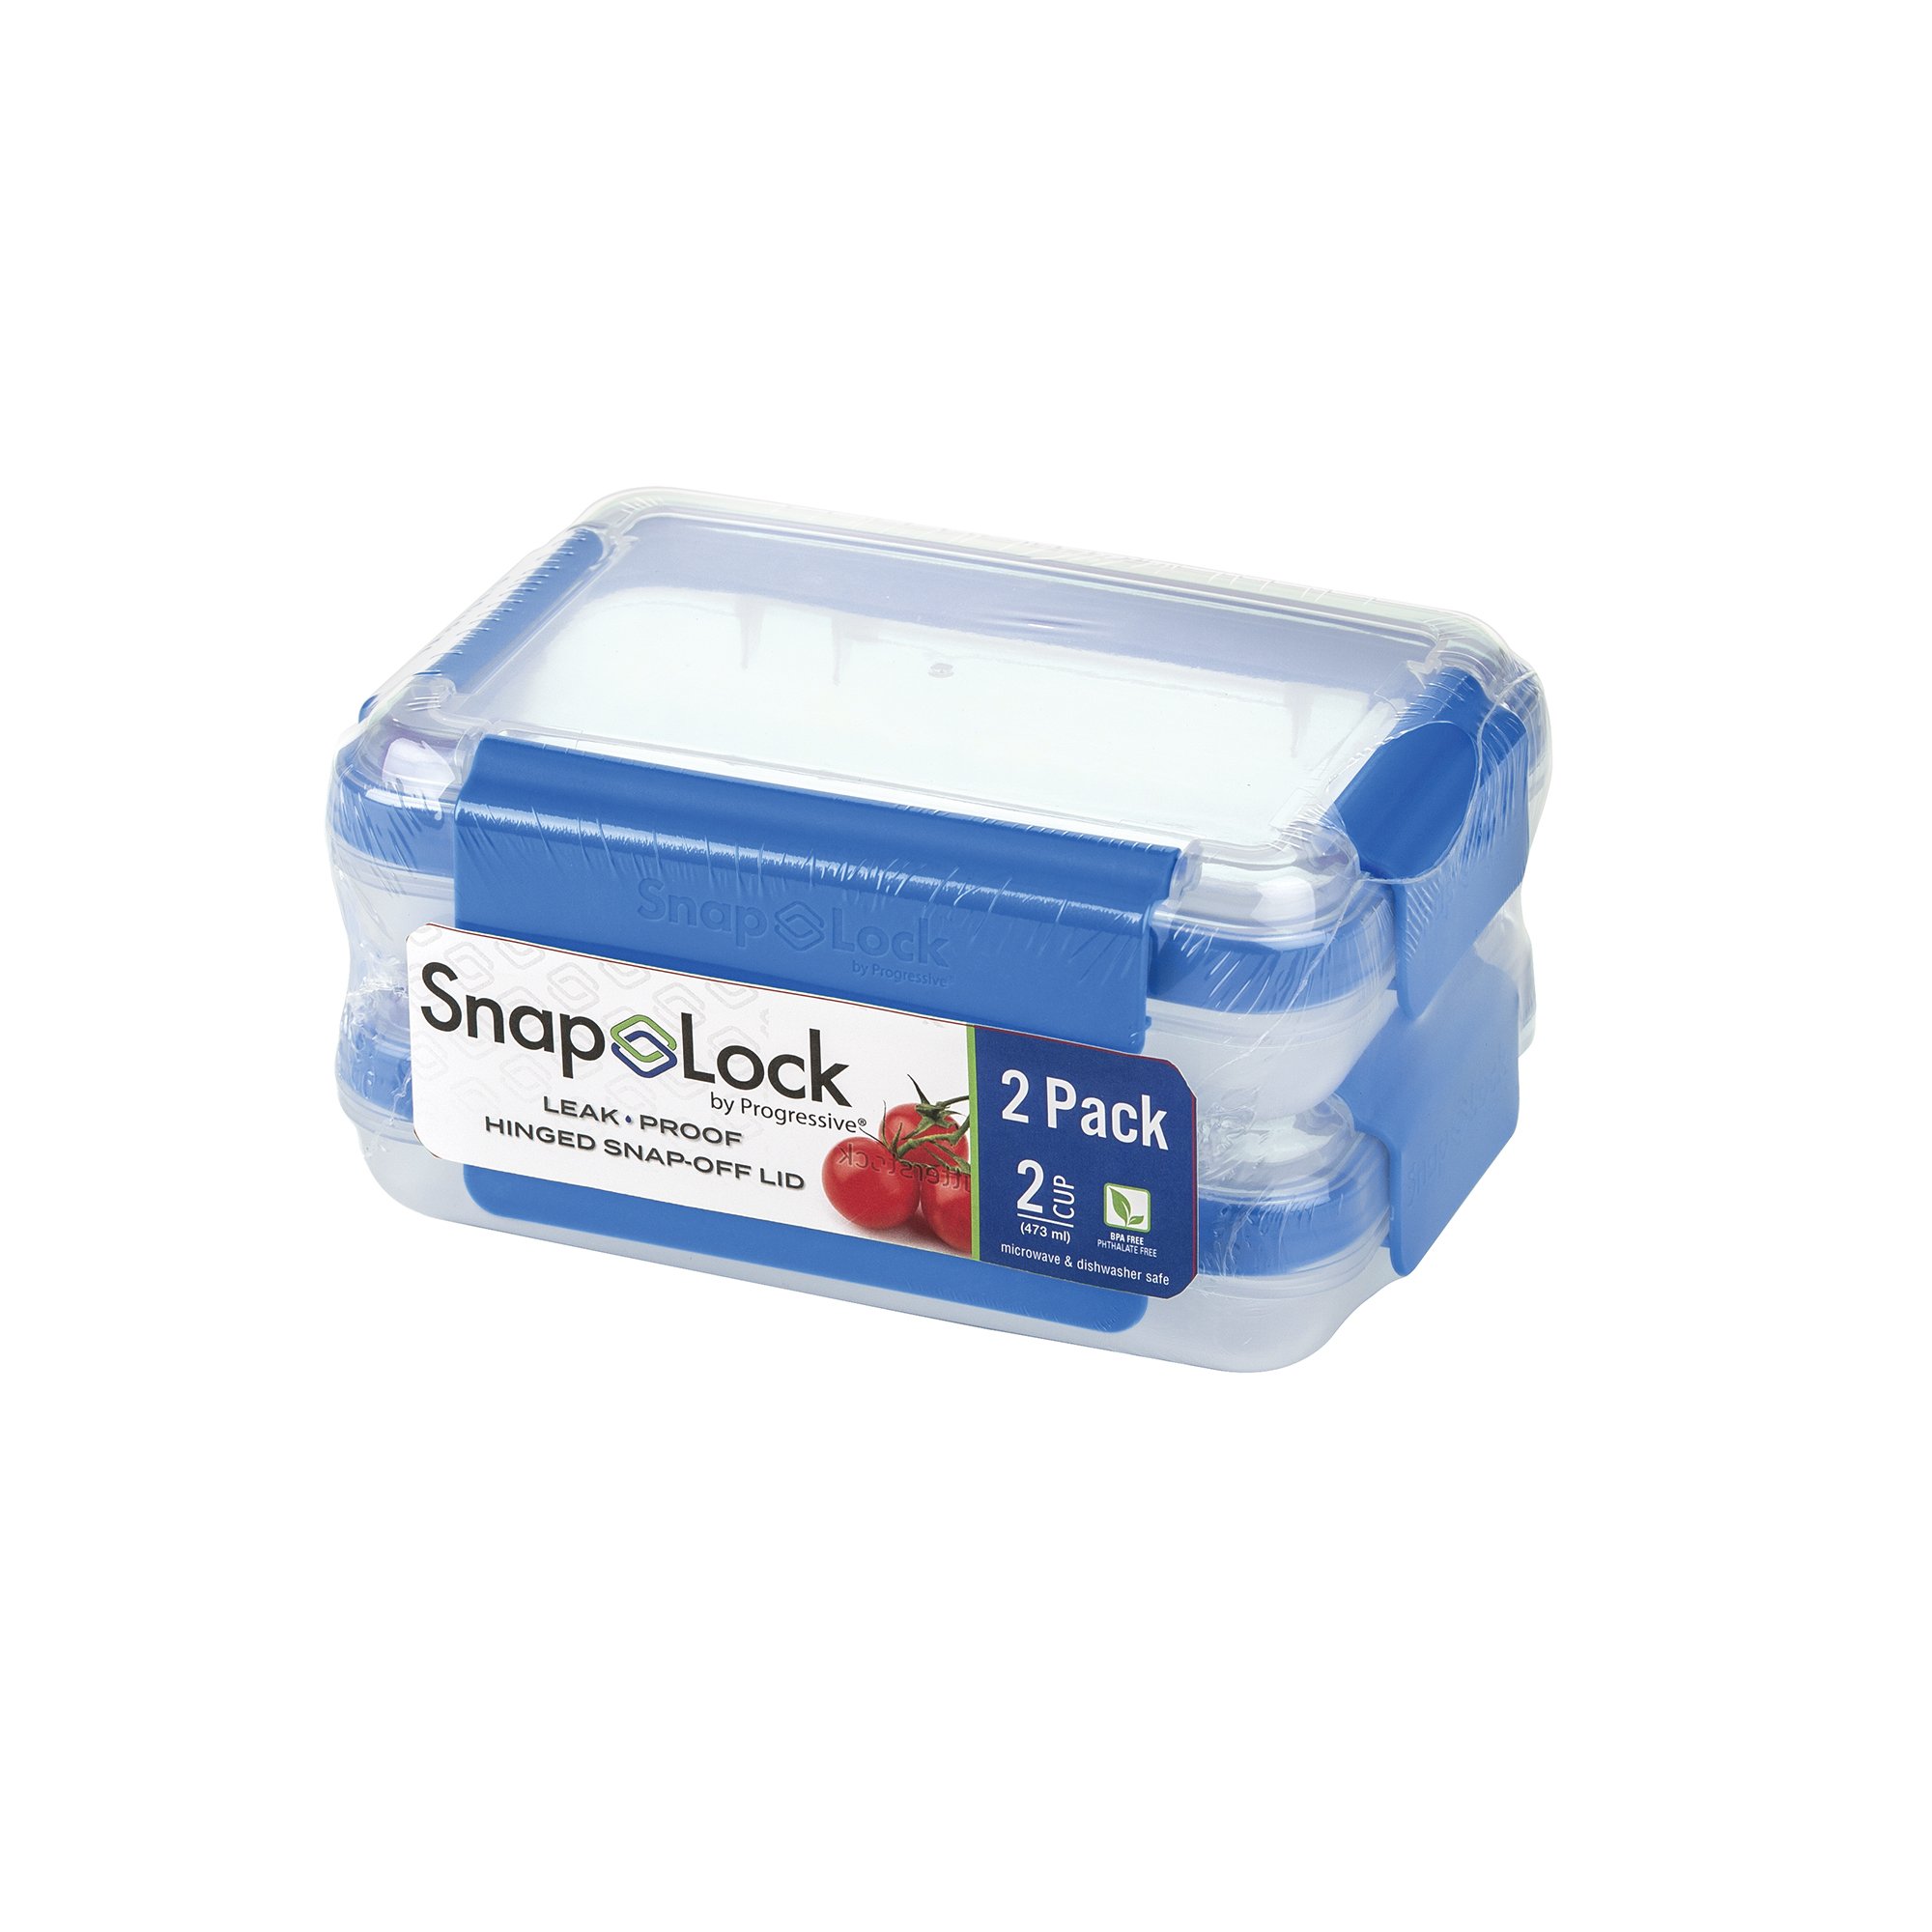 SnapLock by Progressive 2-Cup Container Set - Blue, Easy-To-Open, Leak-Proof Silicone Seal, Snap-Off Lid, Stackable, BPA FREE [ 2-Pack, 2-Cup Capacity]